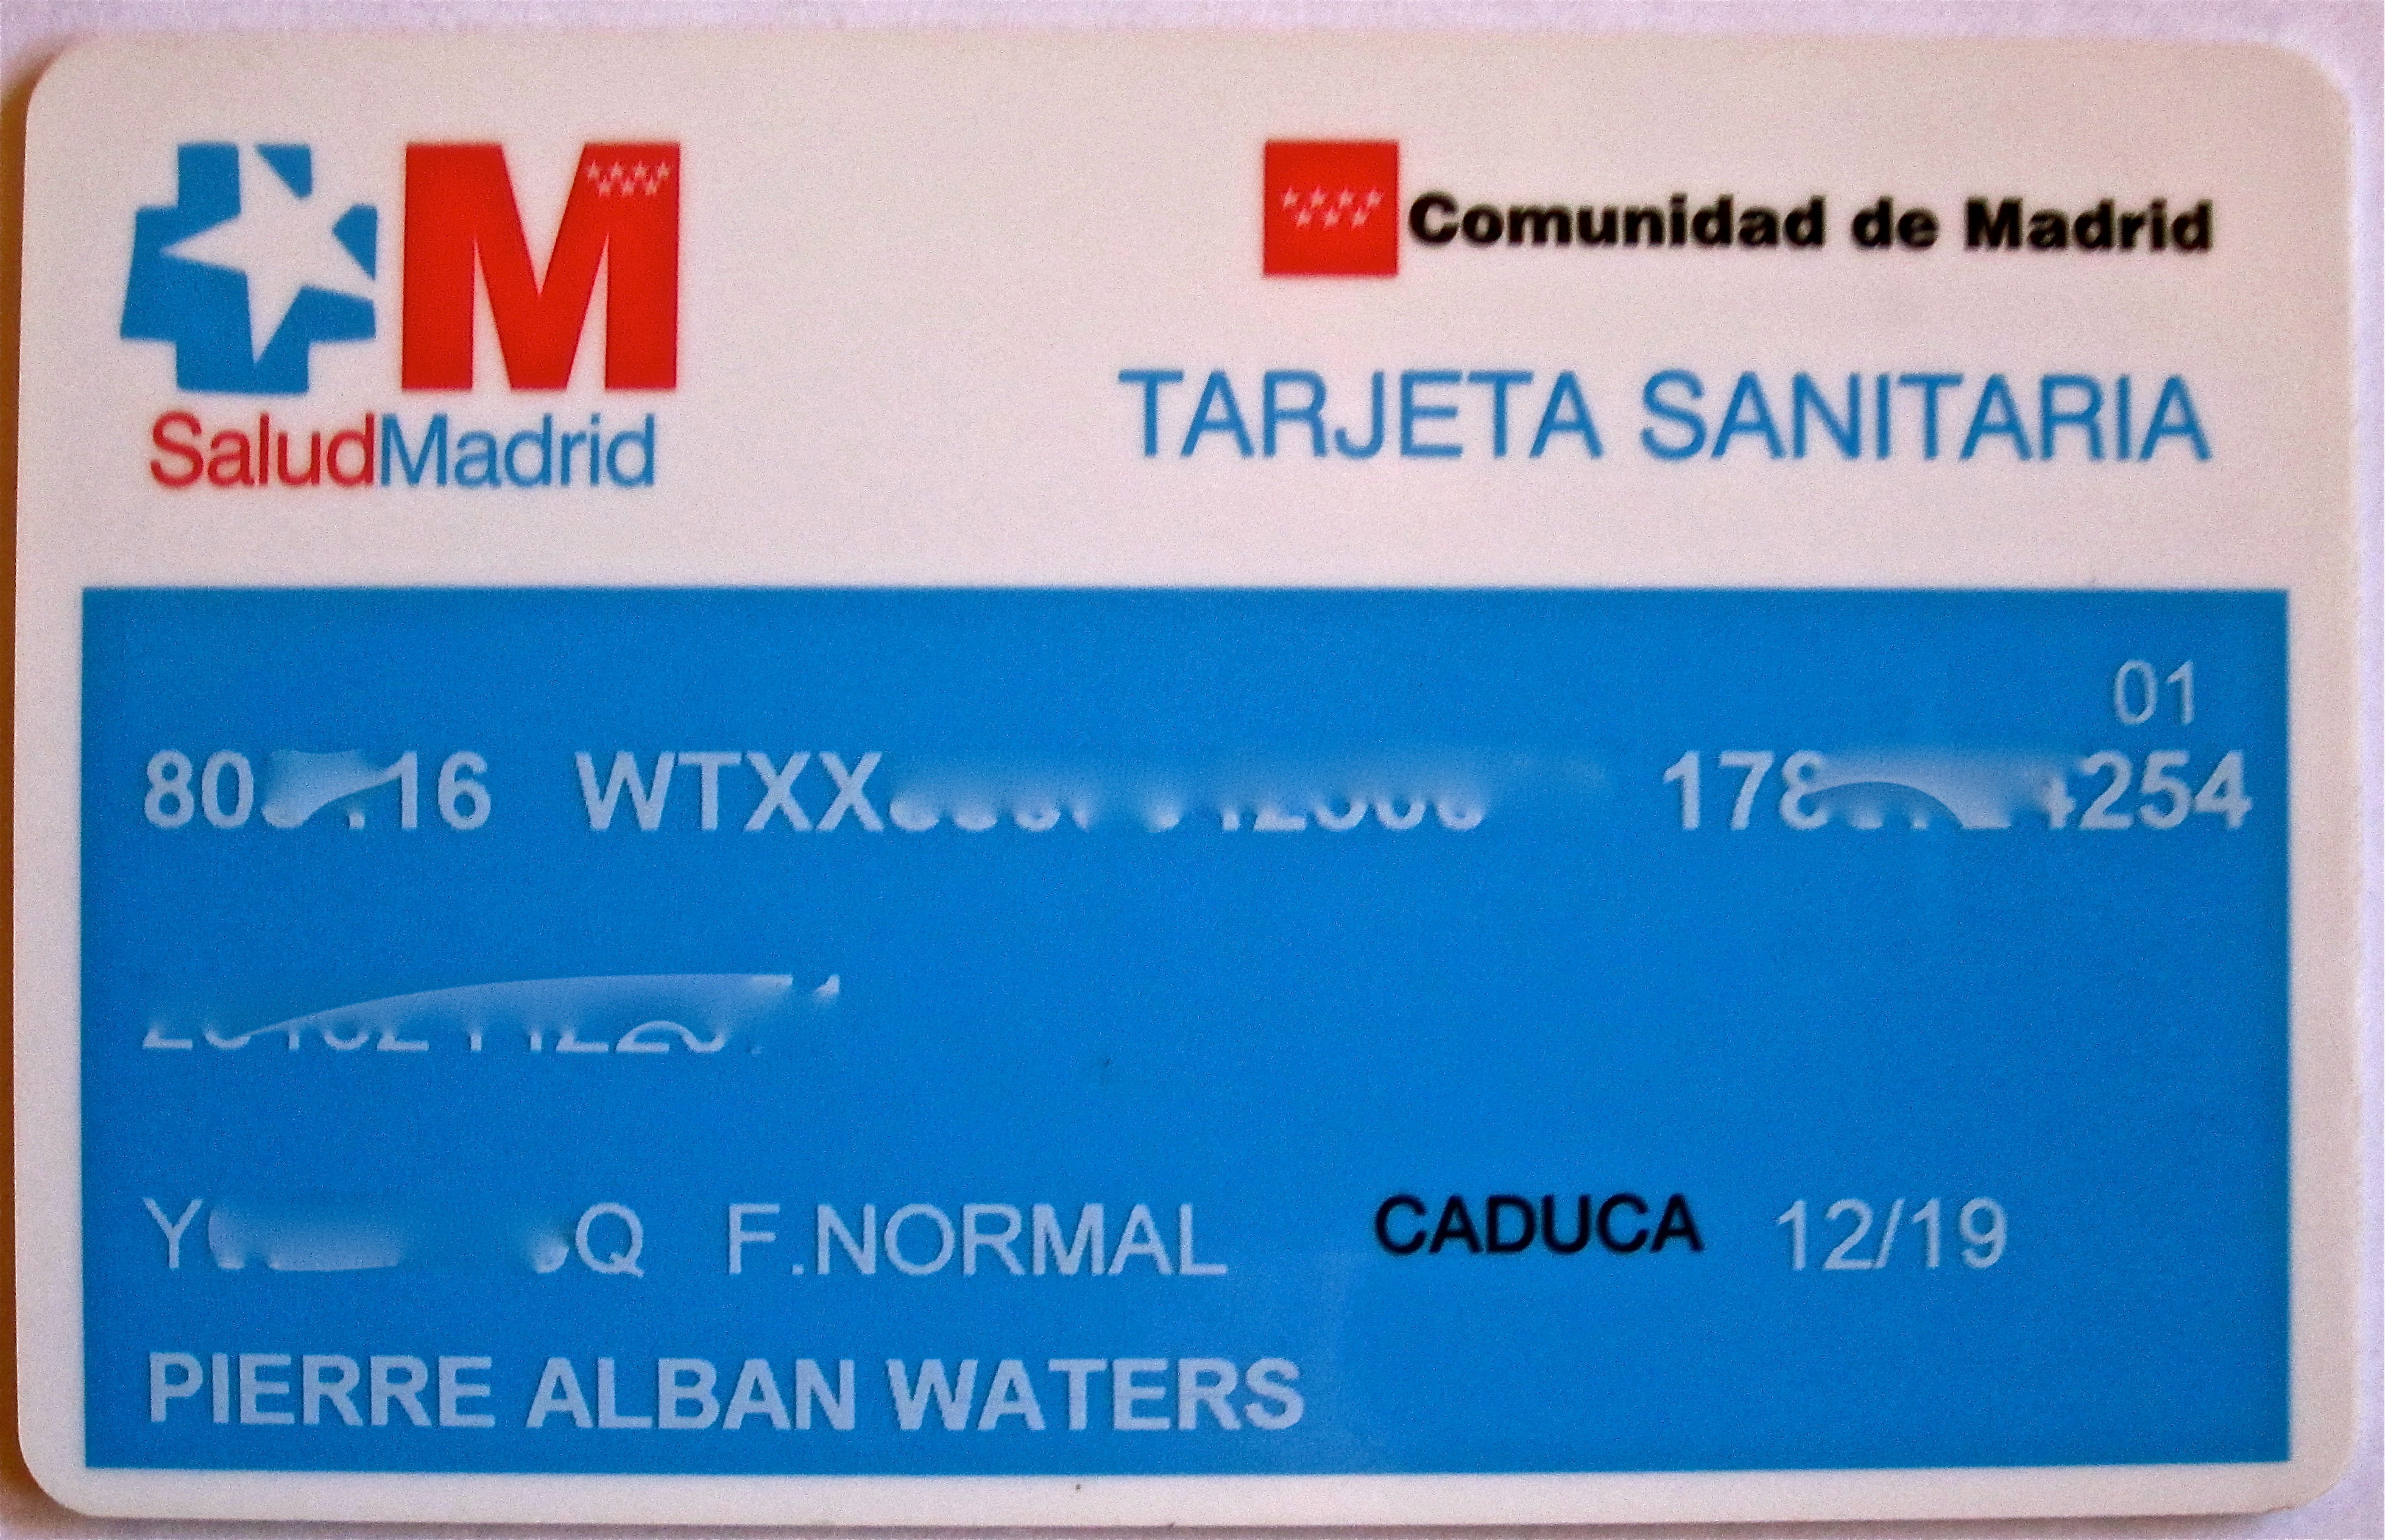 Spanish social security number 